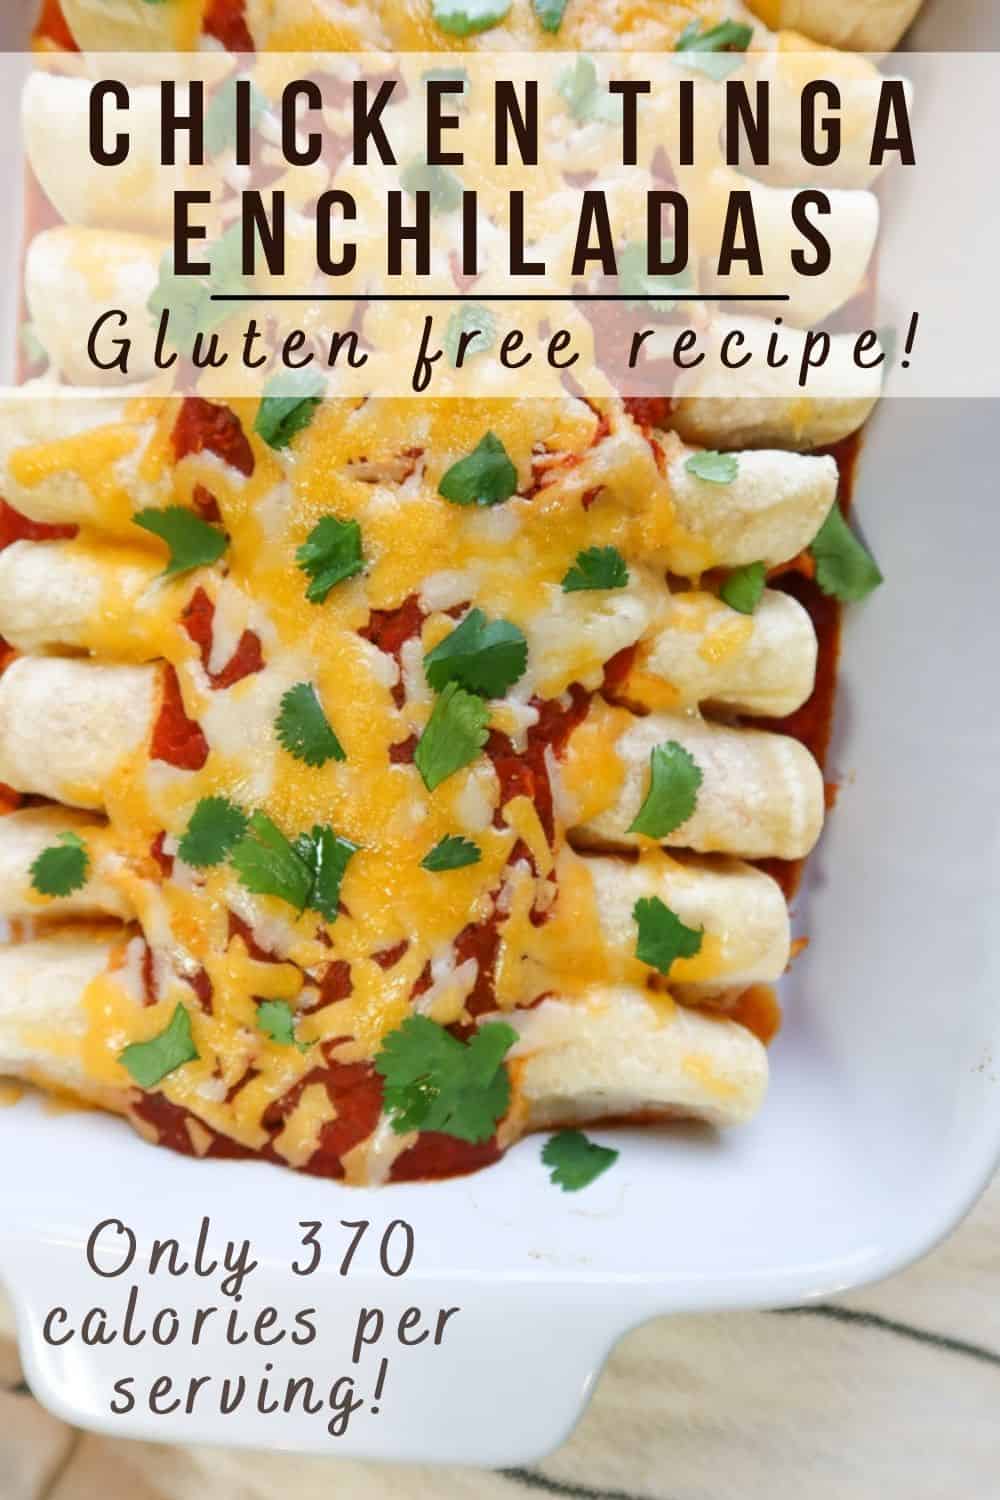 Chicken tinga enchiladas in a white baking dish with text overlay for Pinterest.